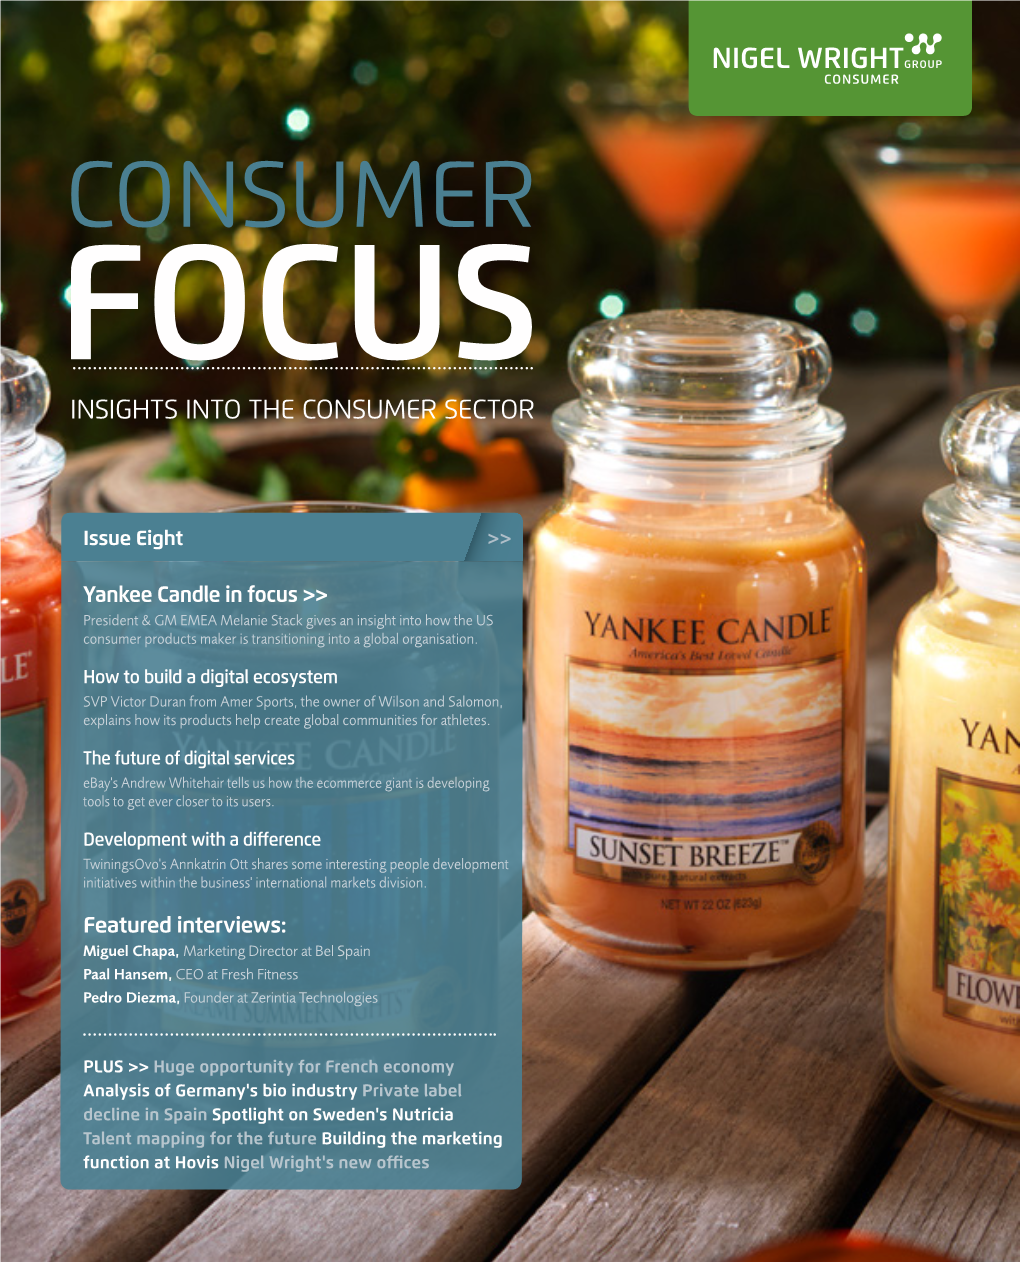 Insights Into the Consumer Sector